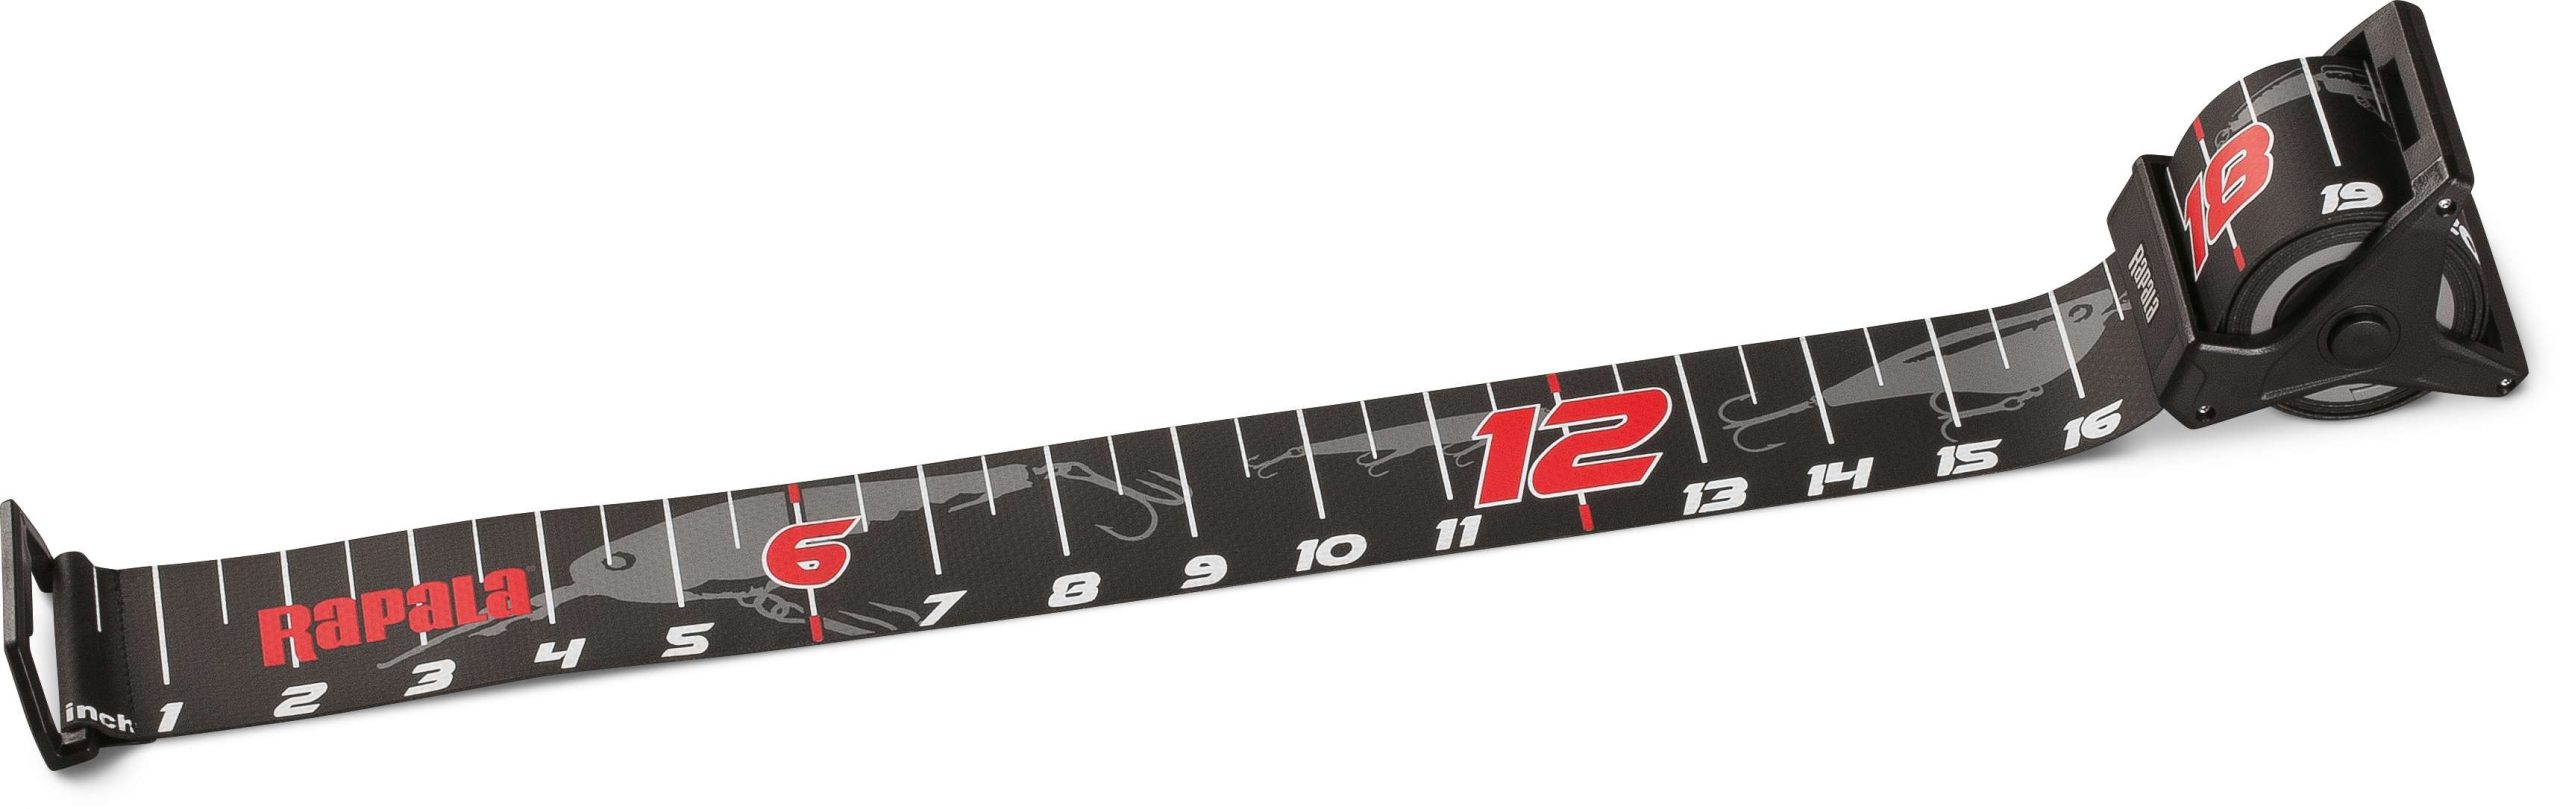 Retractable Ruler<br>	
Rapala<br>
$19.99	<br>
Spring loaded retractable ruler for easy storage with oversized, easy to read numbers, in 1/2-inch increments up to 60 inches. It has a non-reflective surface to ensure lengths show in photos, made from a long-lasting, UV protected, waterproof material. To frost the cake it has a flip-up nose board for accurate measuring.
